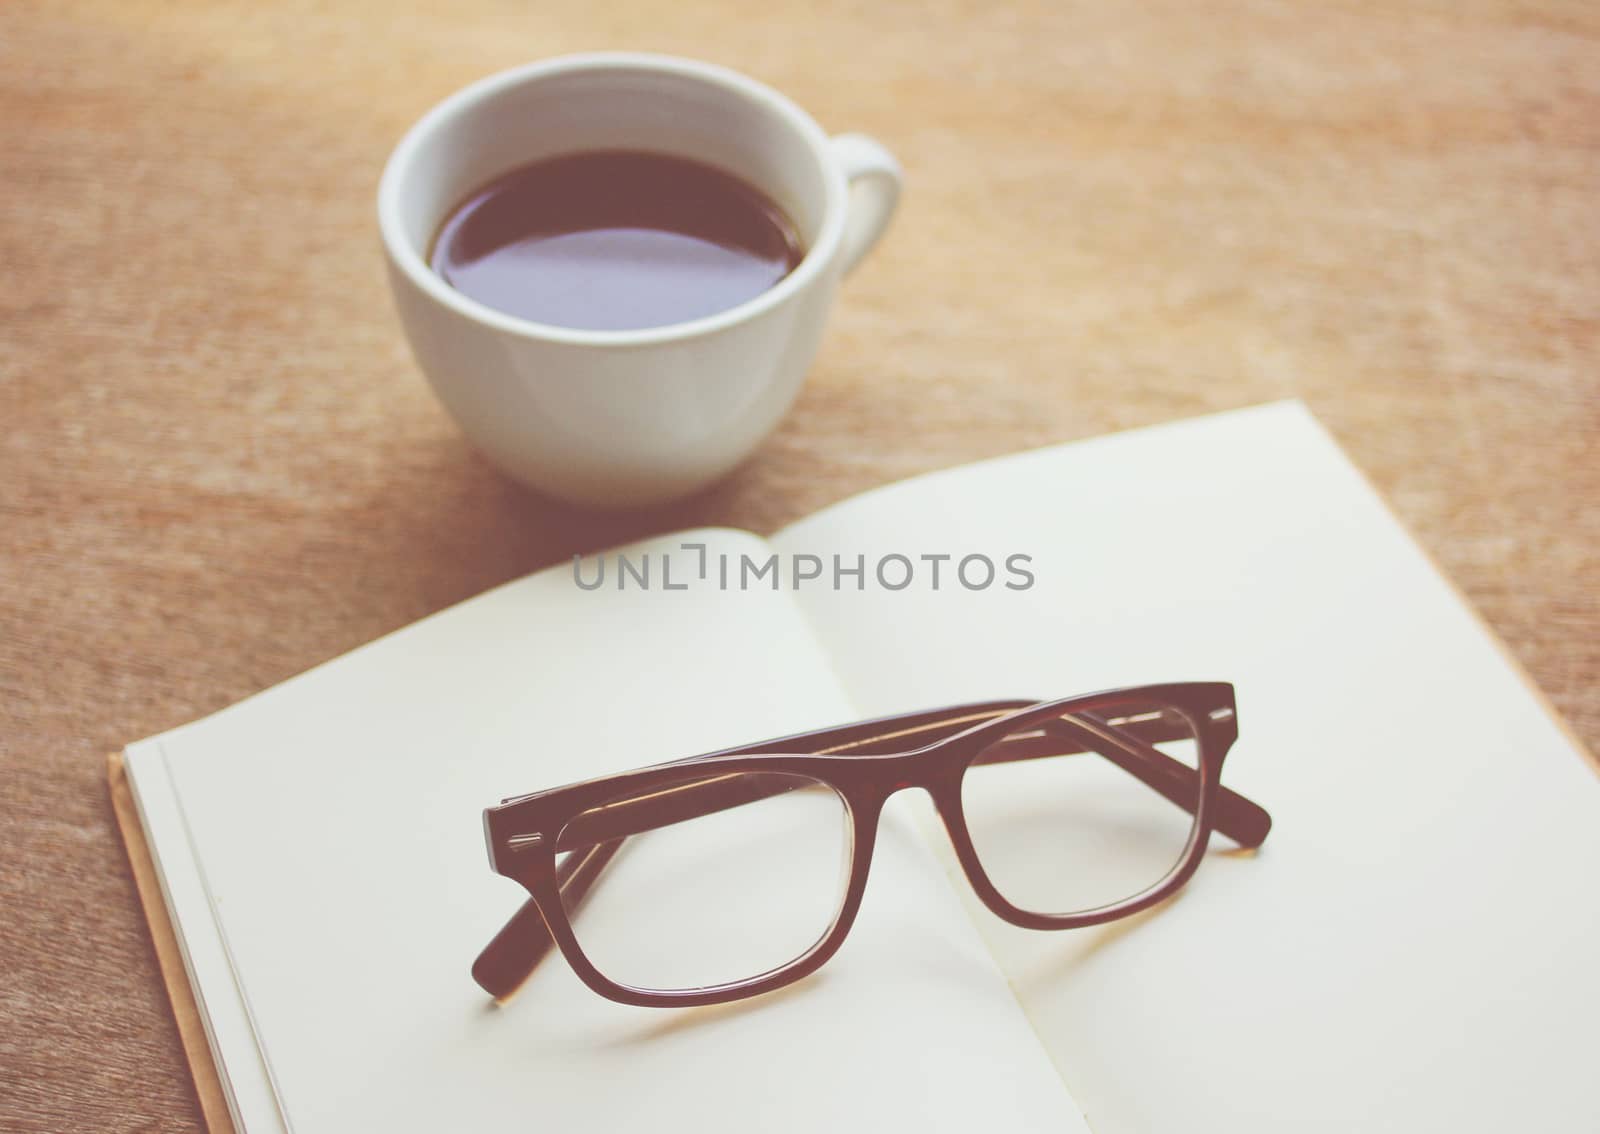 Eyeglasses on notebook and black coffee, retro filter effect